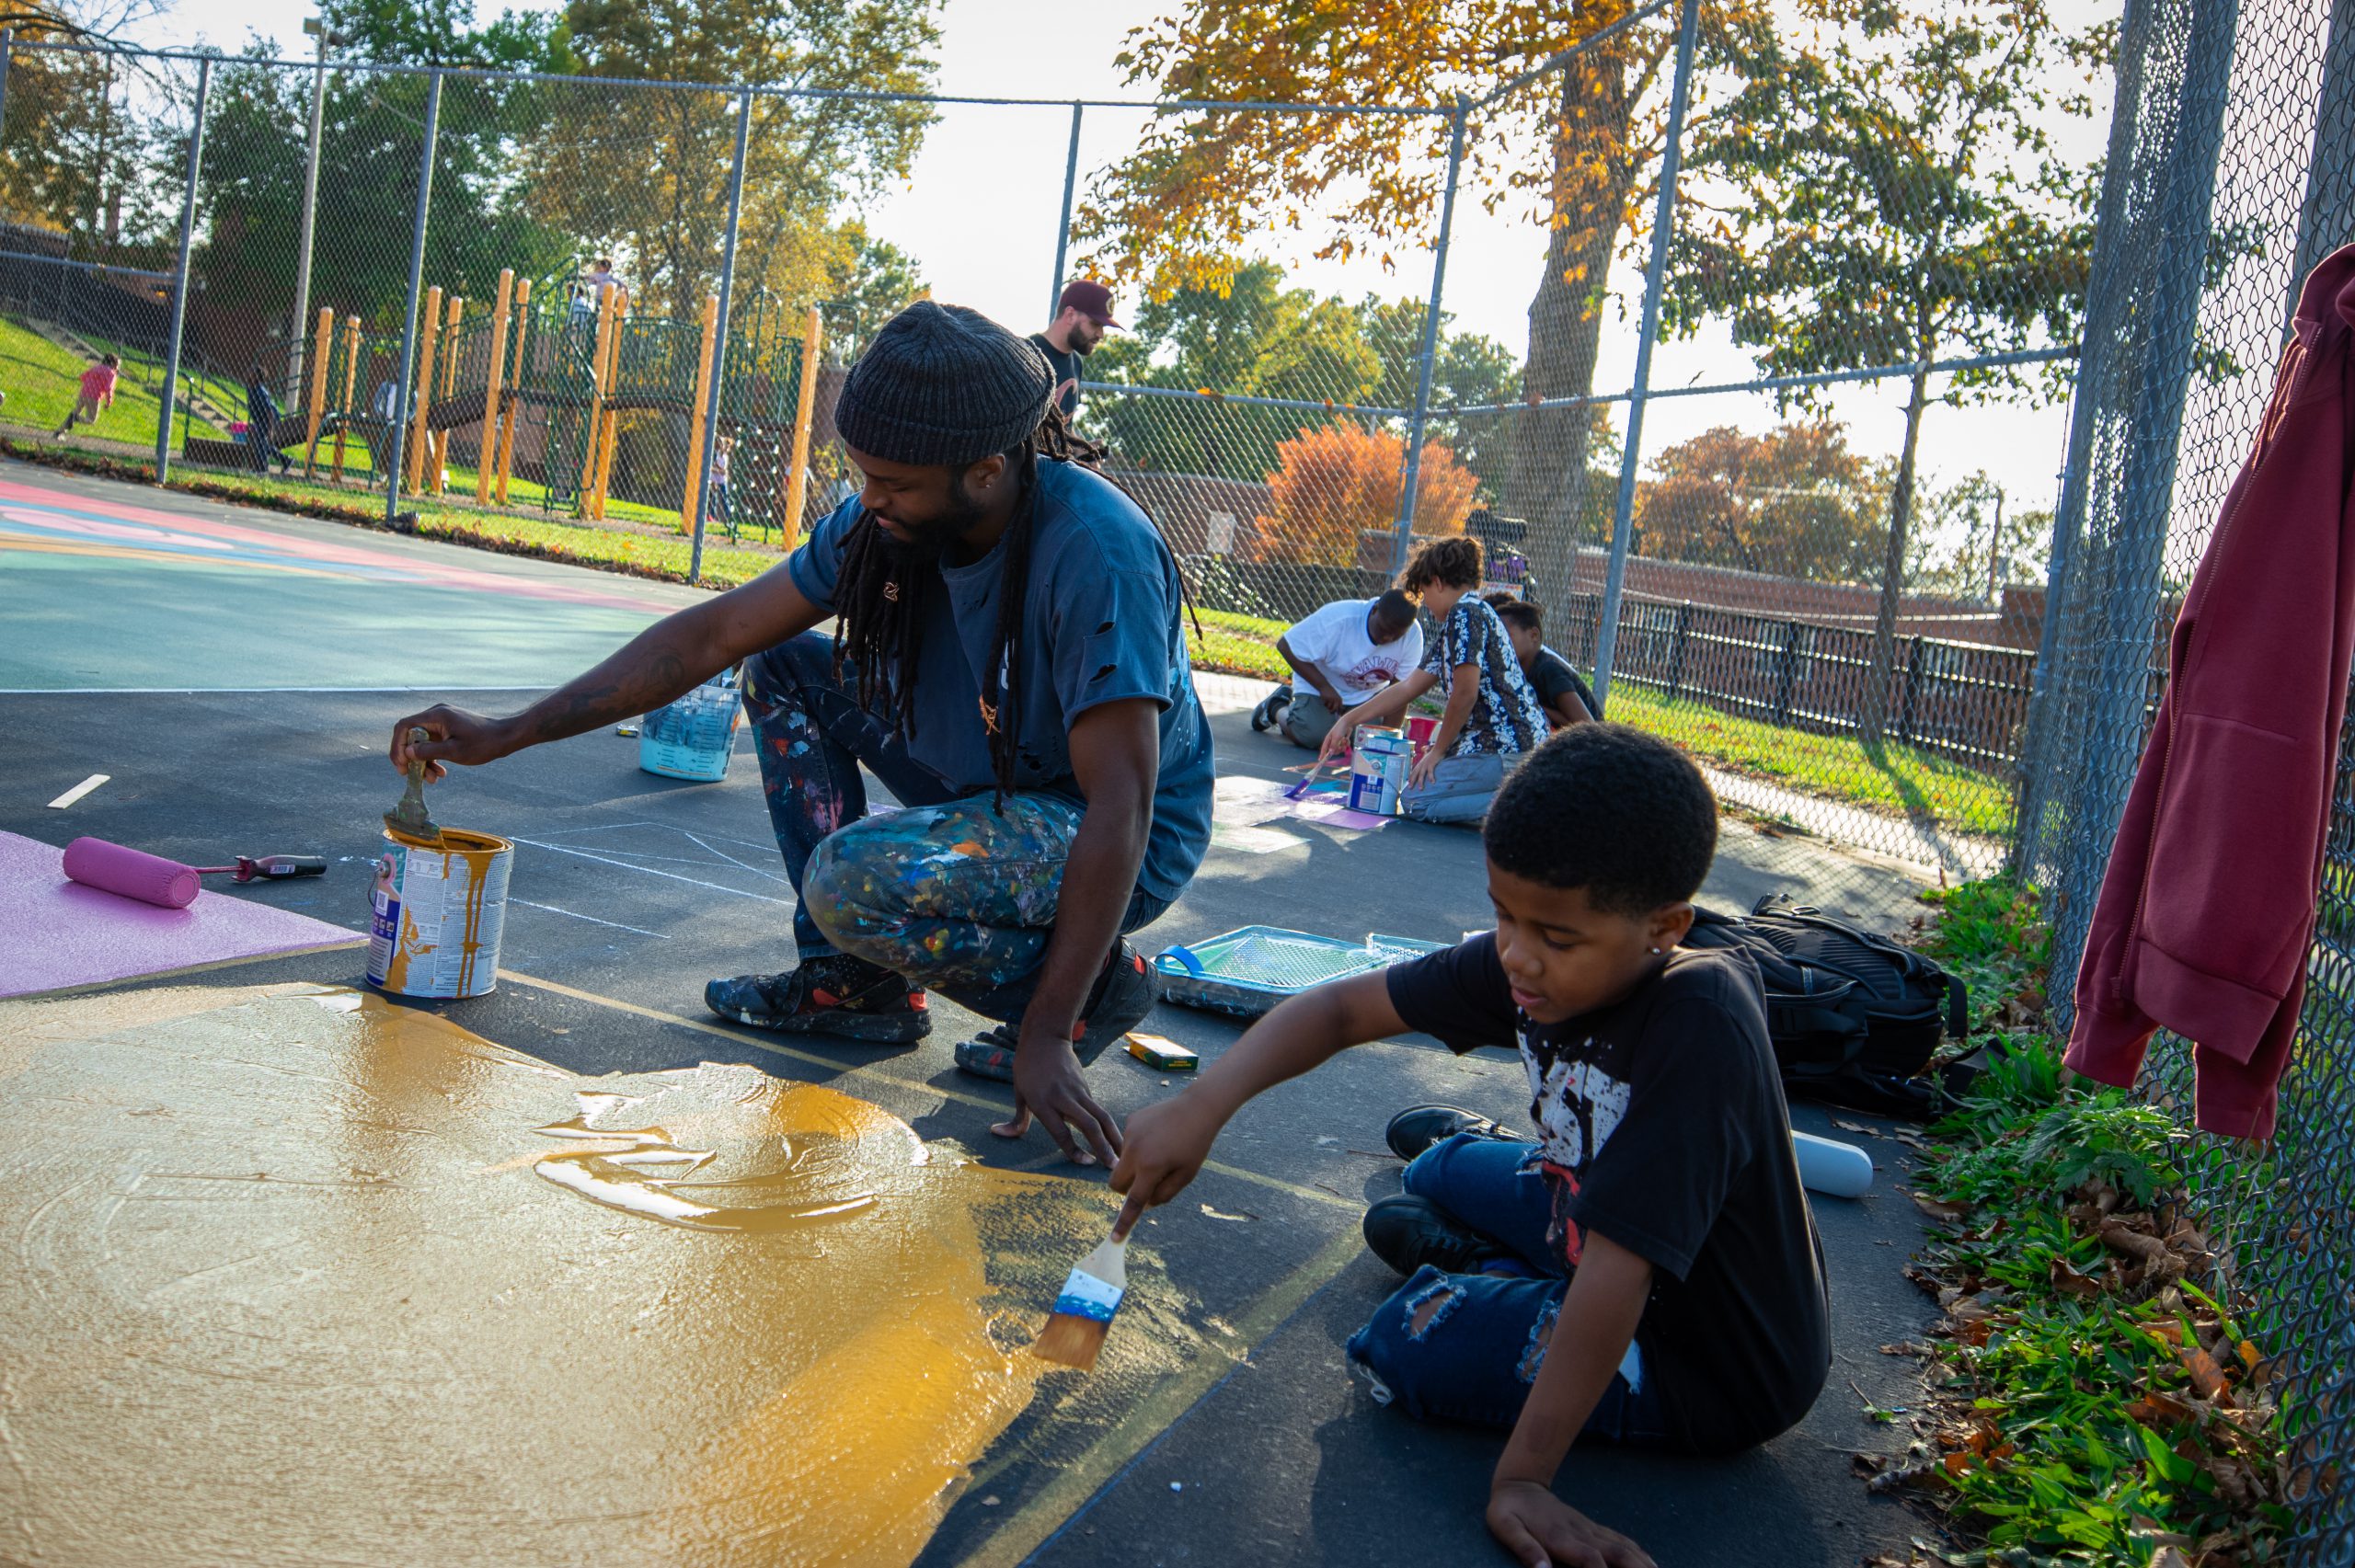 A school-aged boy paints a mural on the surface of a basketball court with help from a young man.